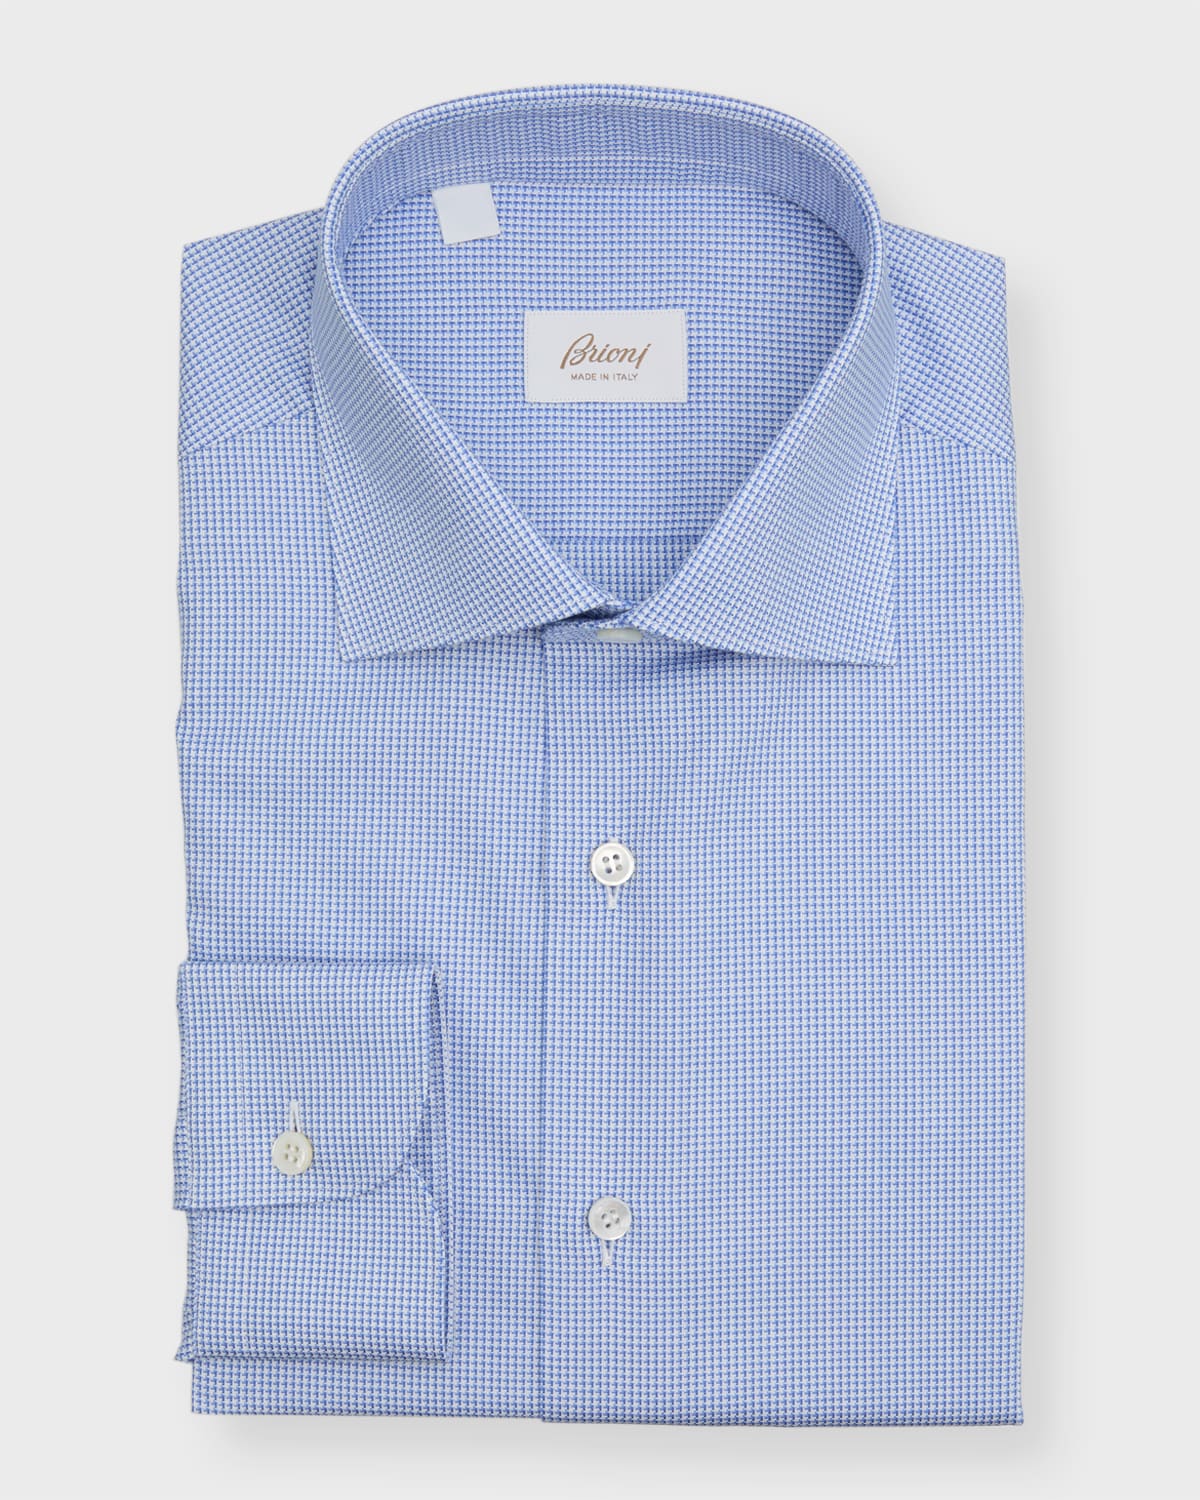 Brioni Men's Micro-houndstooth Dress Shirt In Navy/white